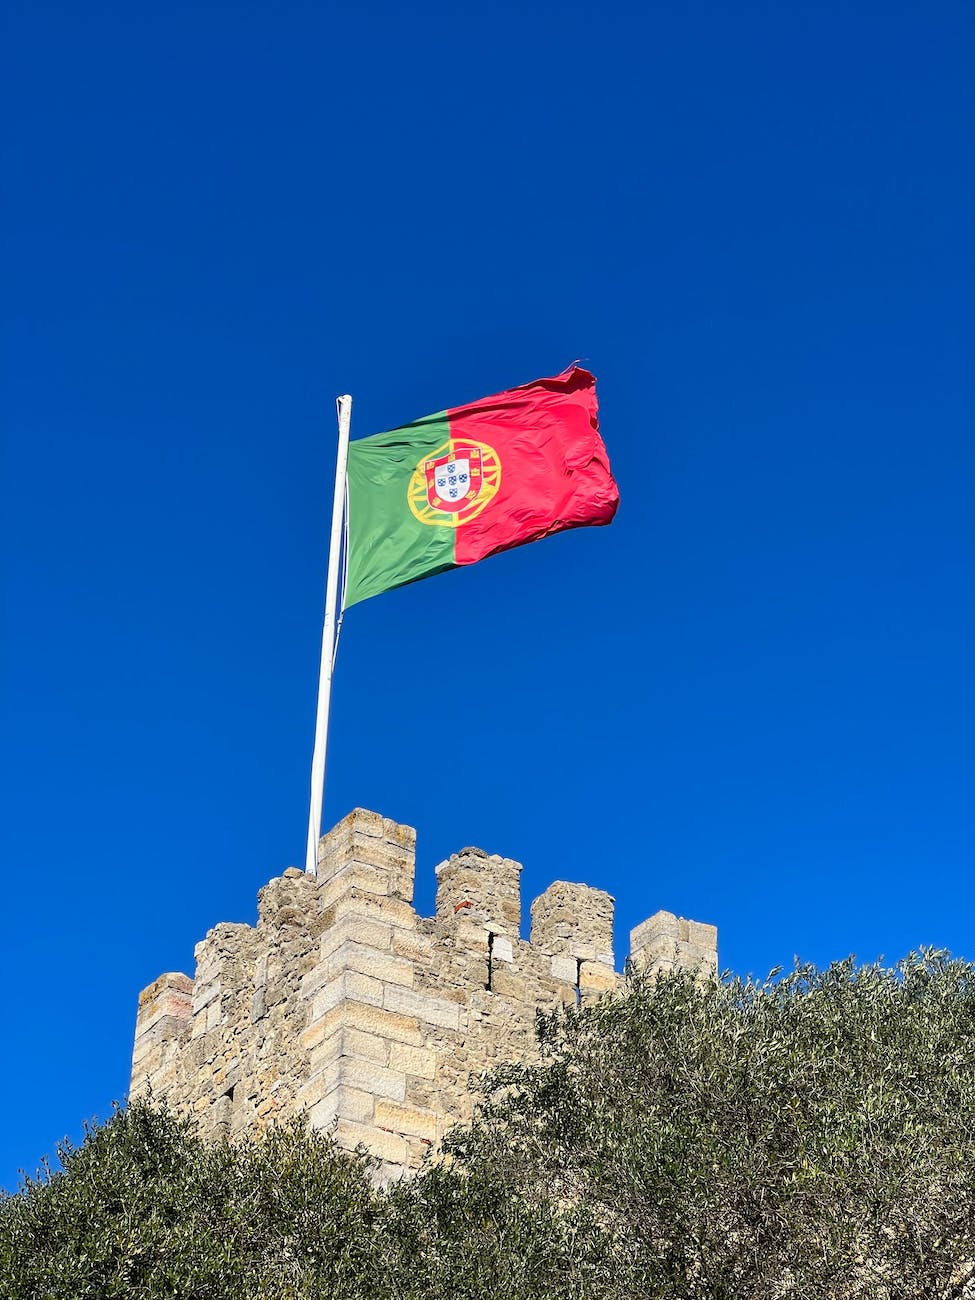 red and green portuguese flag on top of brown concrete building in Portugal